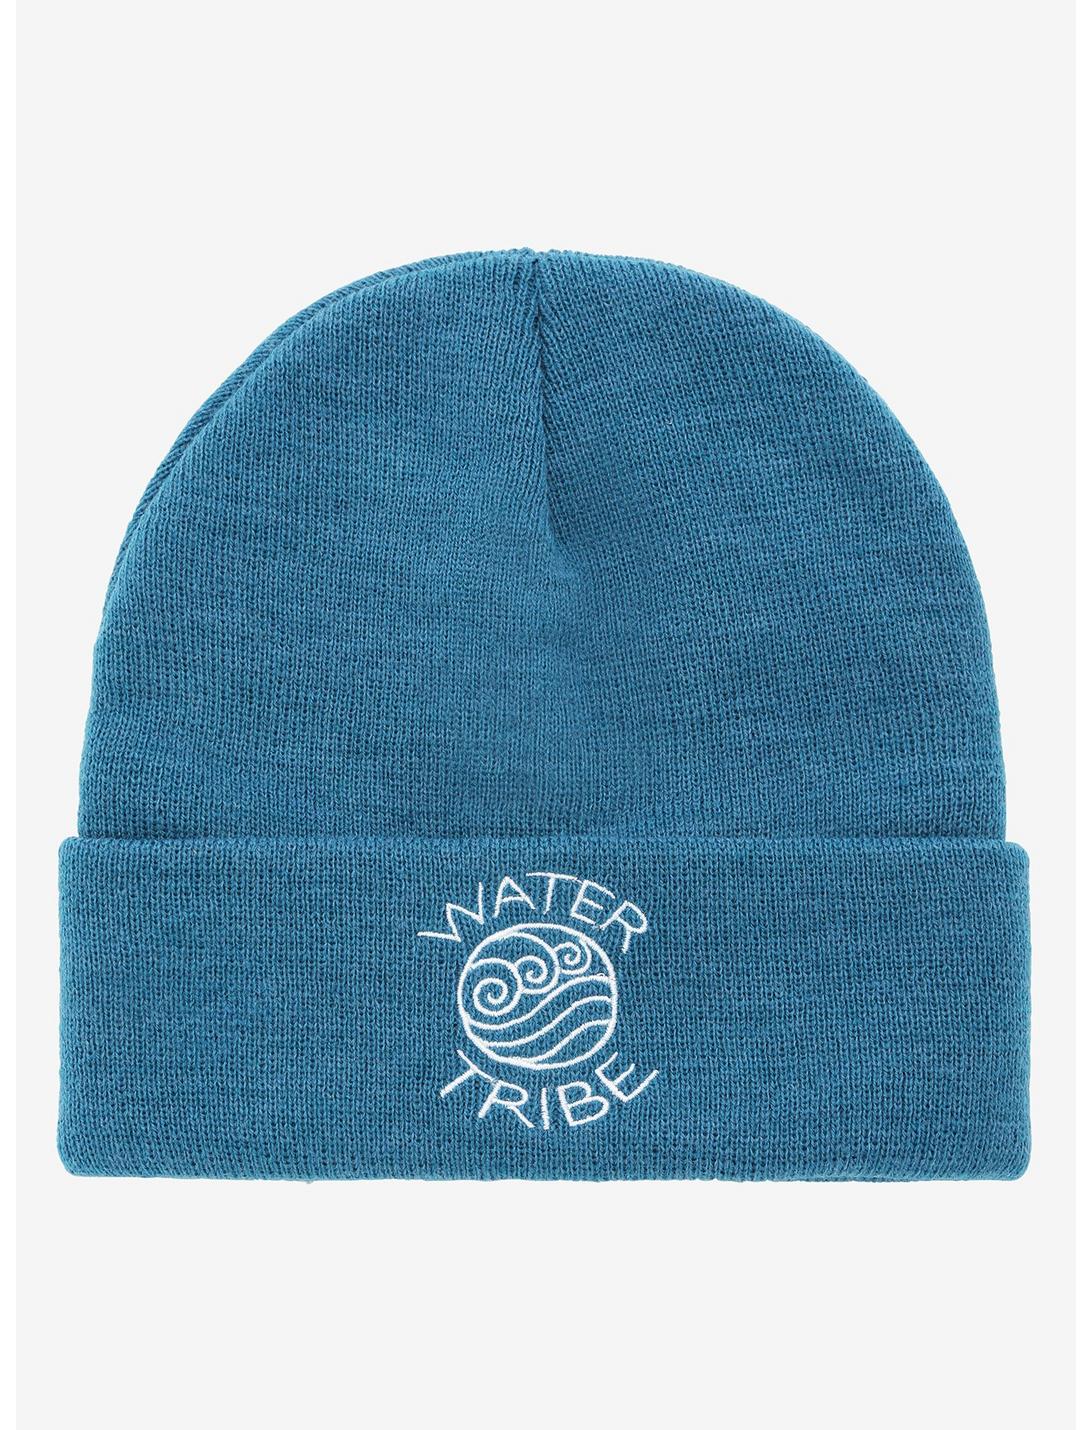 Avatar: The Last Airbender Water Tribe Cuff Beanie - BoxLunch Exclusive, , hi-res